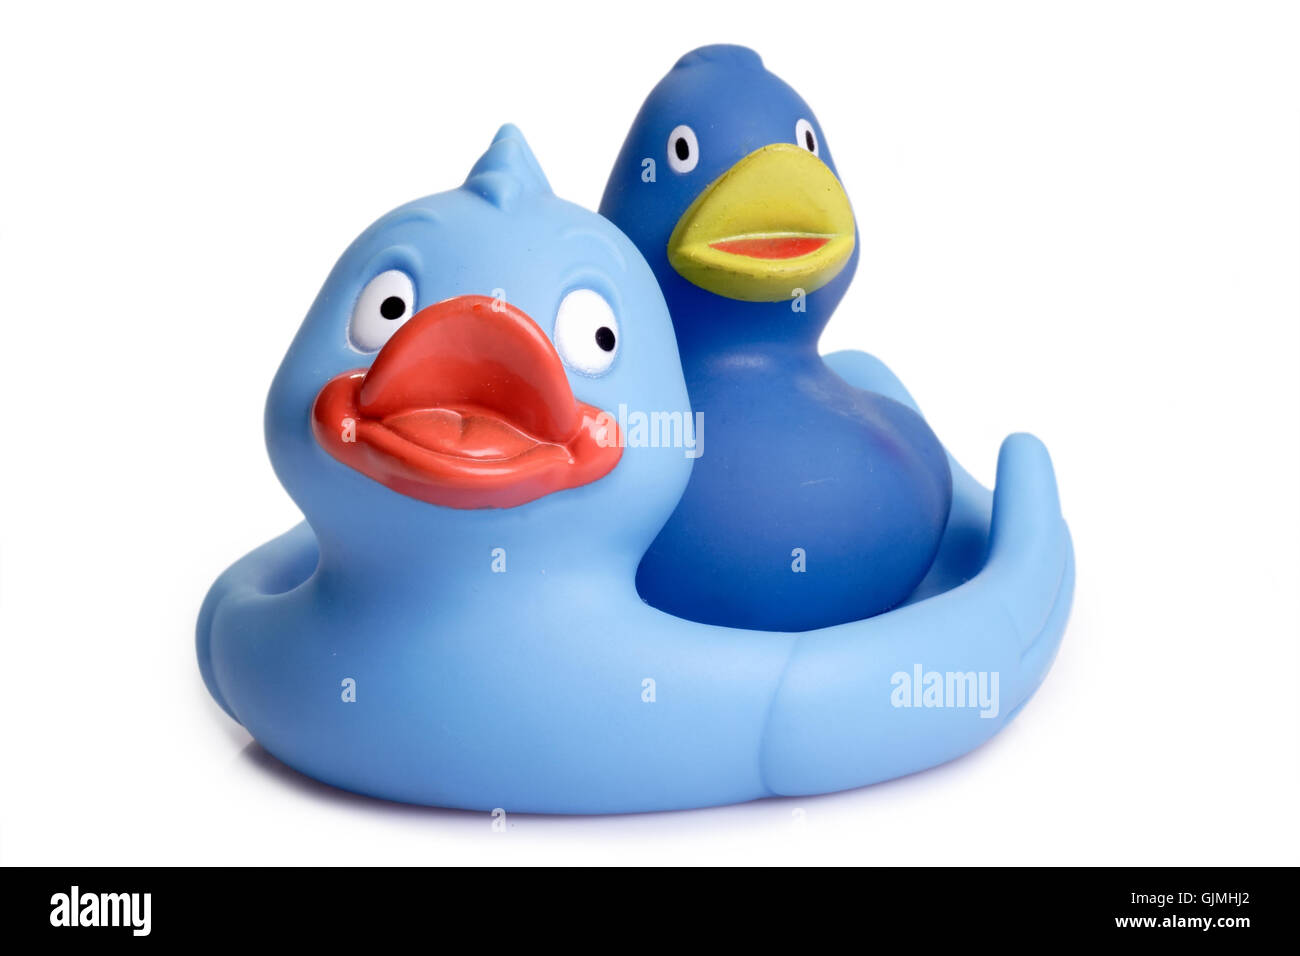 toy duck rubber duck Stock Photo